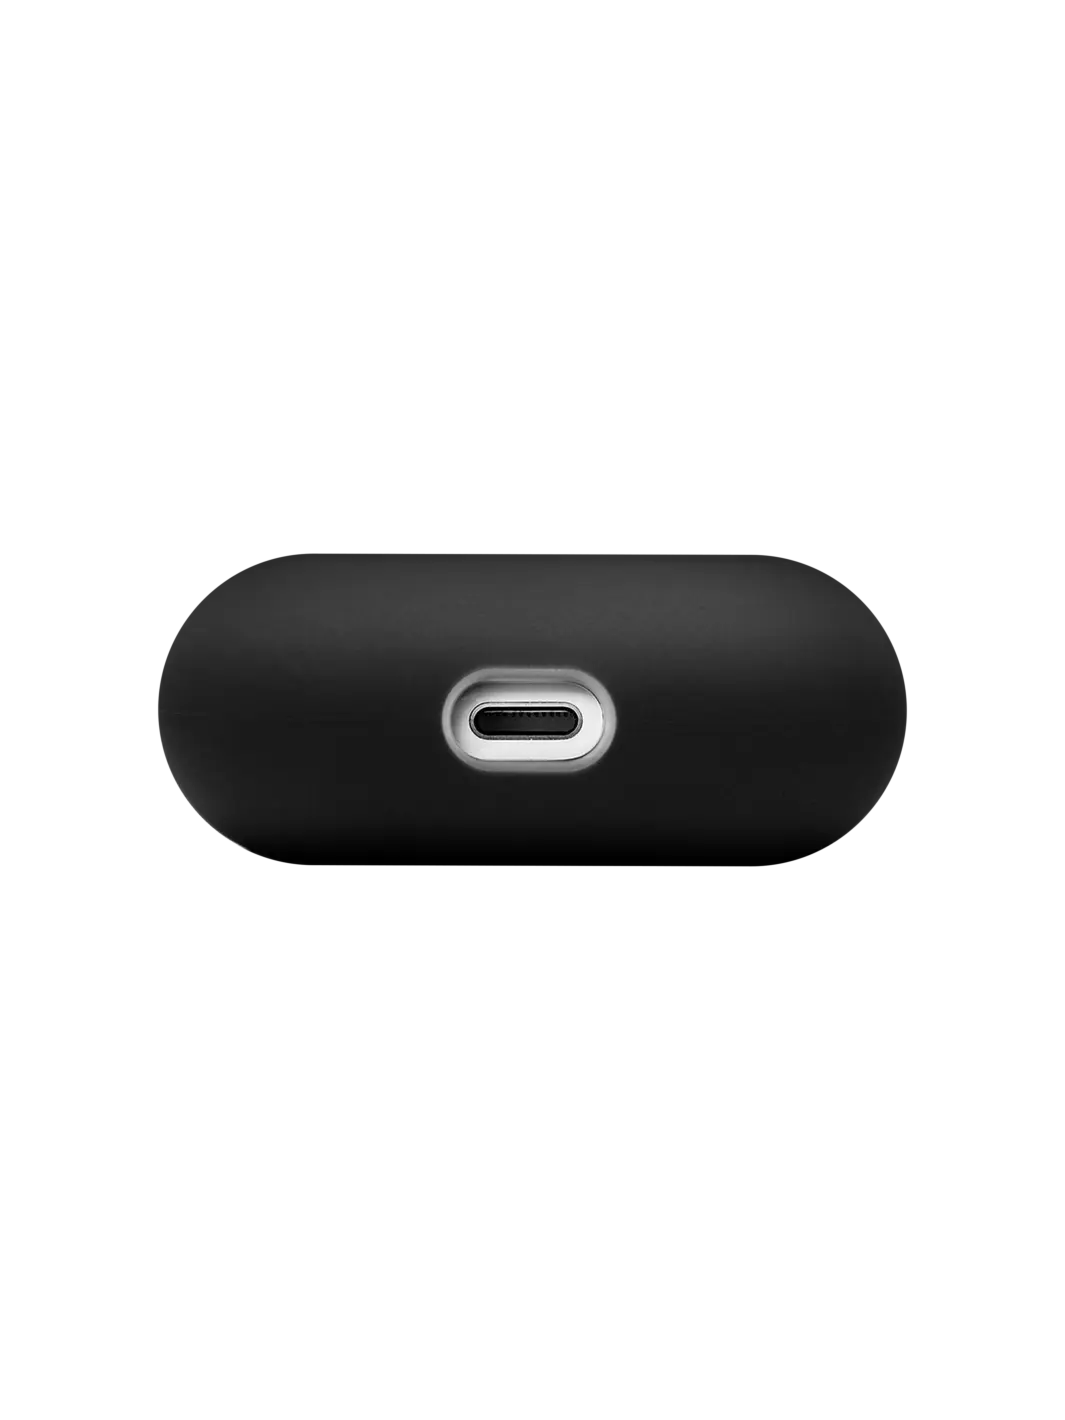 Costa Rica AirPod Case: Impact-Protective Silicone Case from 